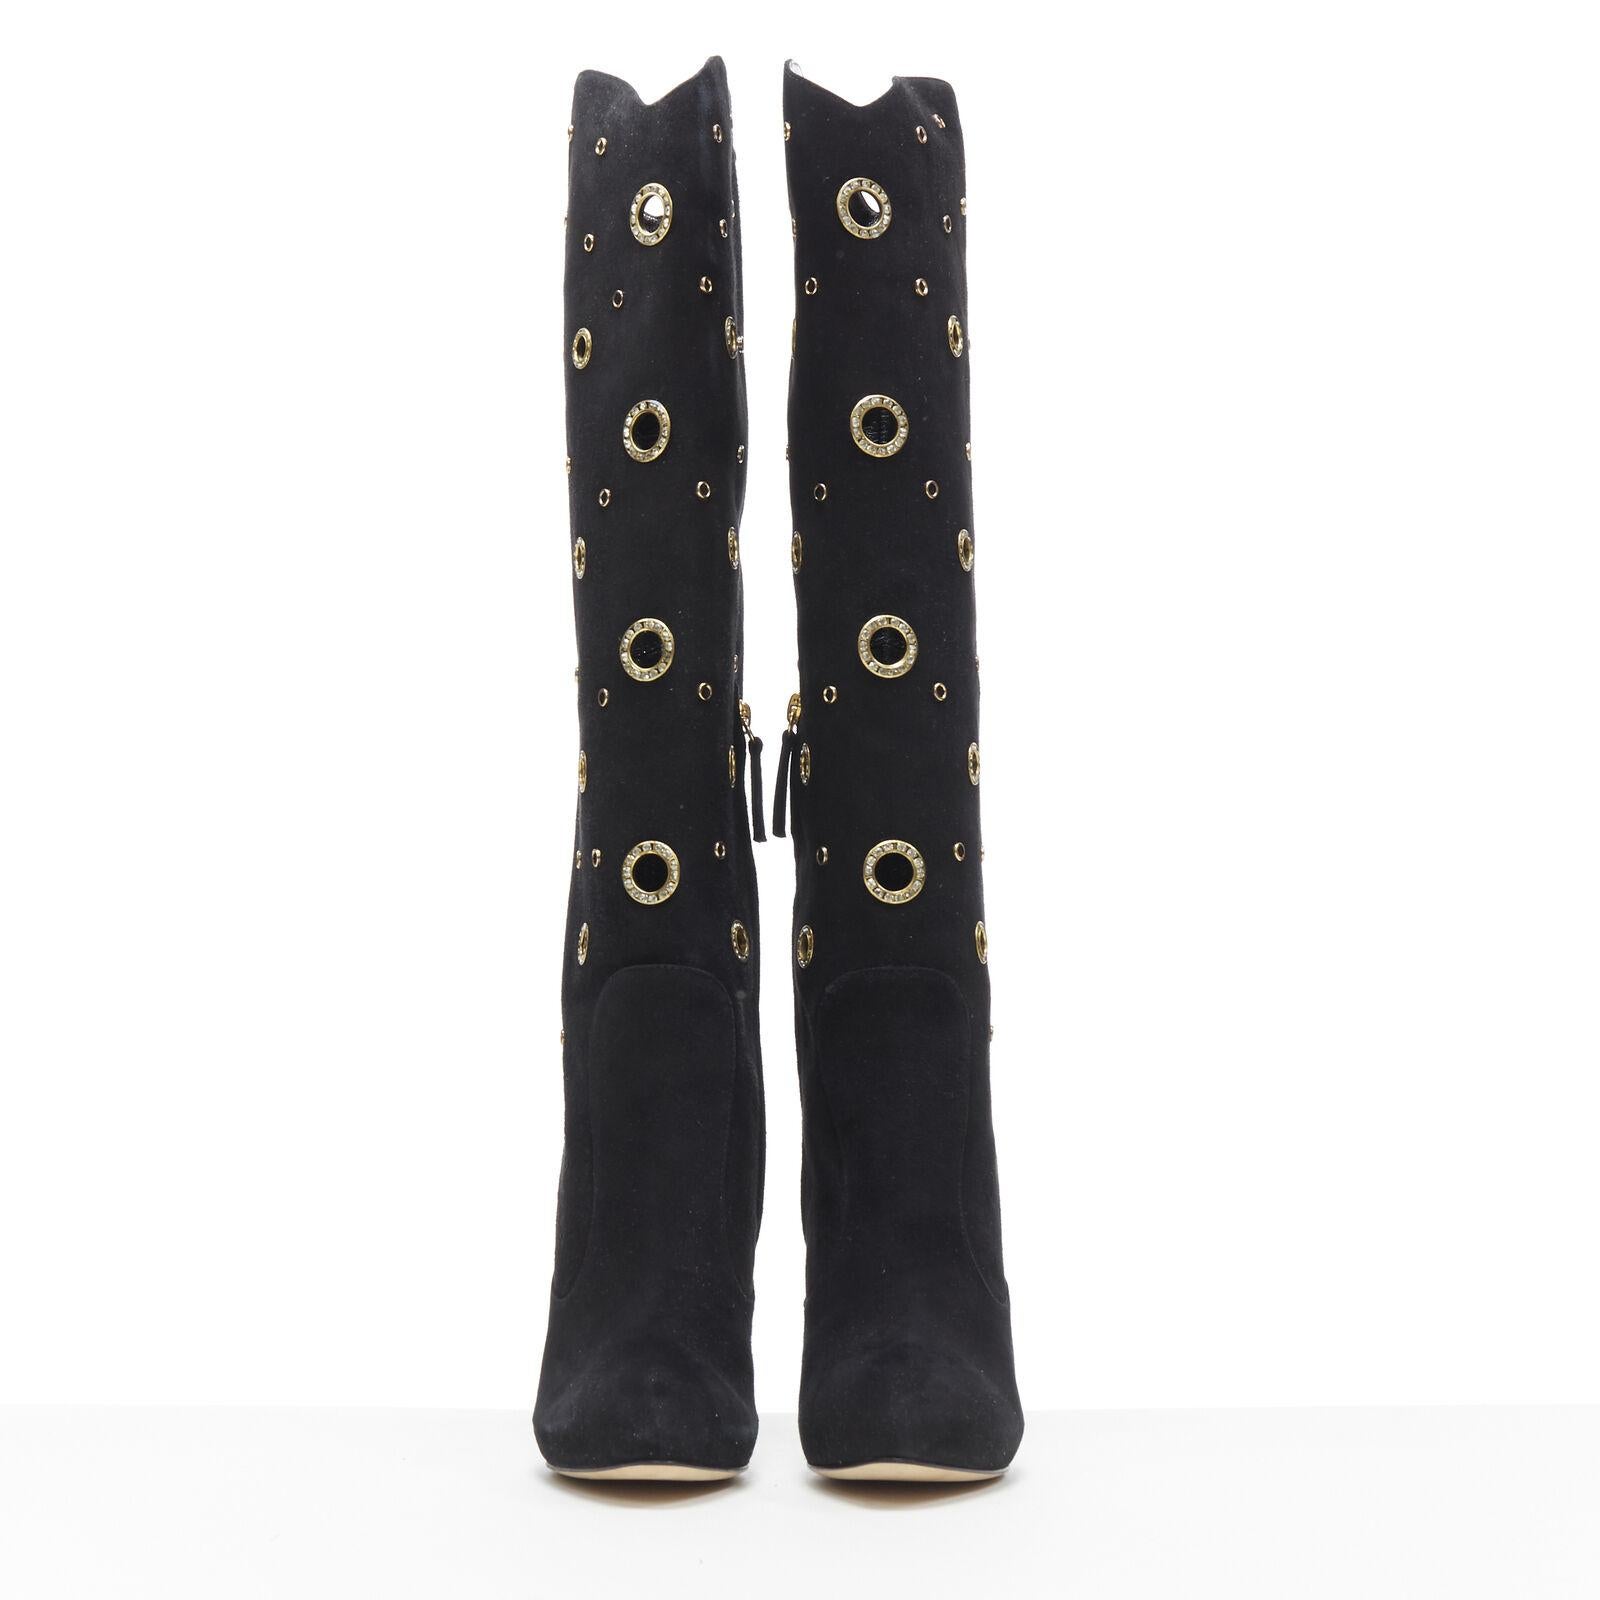 Black new GIUSEPPE ZANOTTI black suede gold crystal eyelet high heel tall boots EU37 For Sale